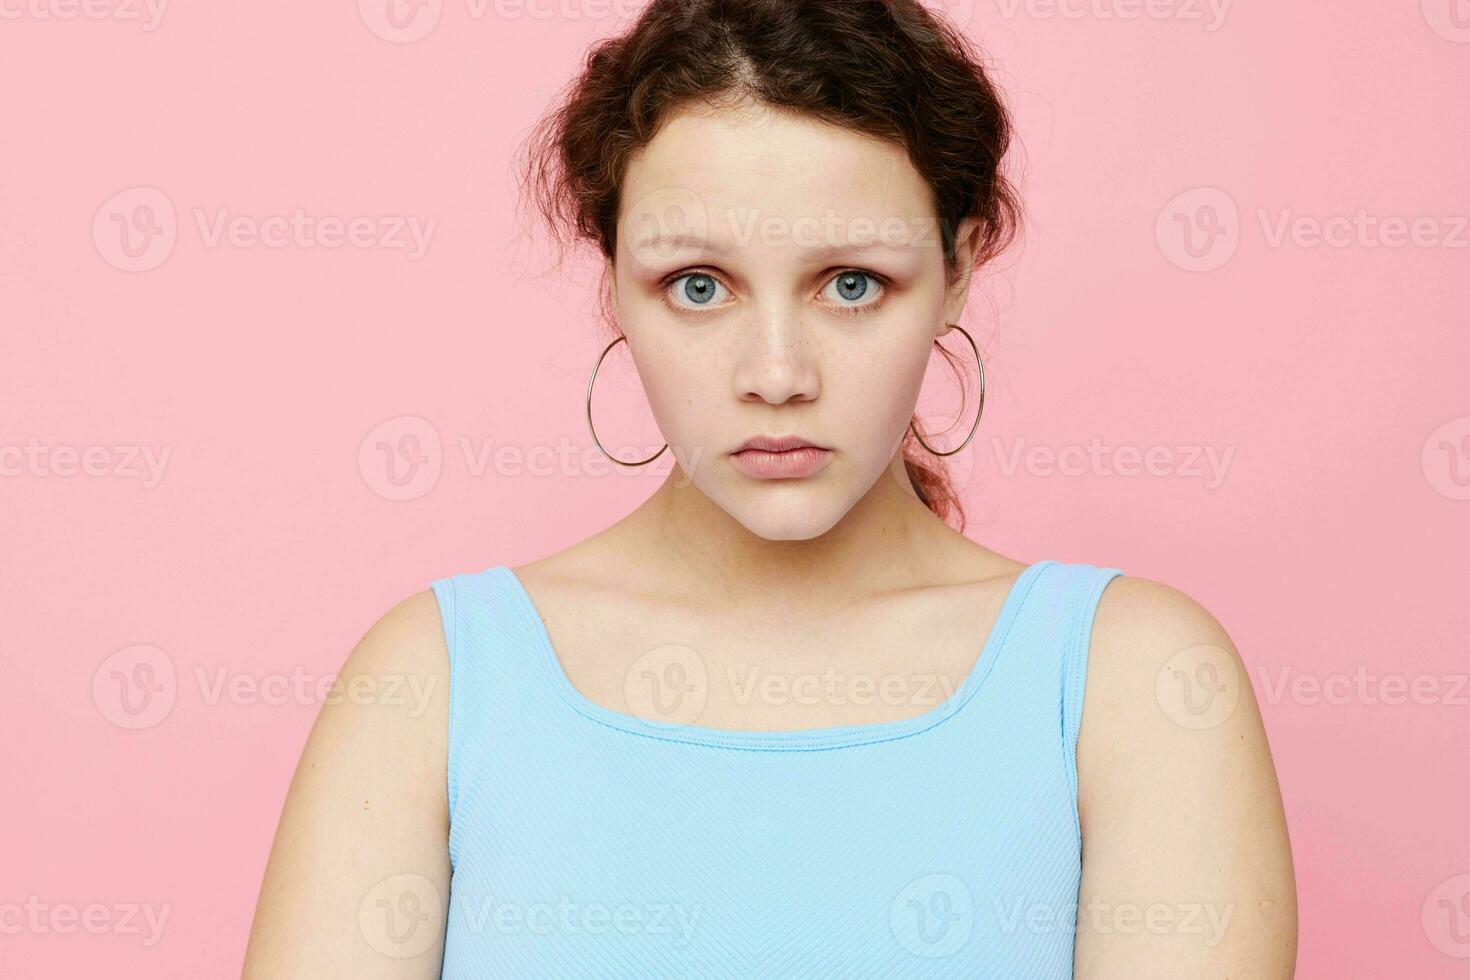 pretty woman grimace close-up emotions earrings posing pink background unaltered photo